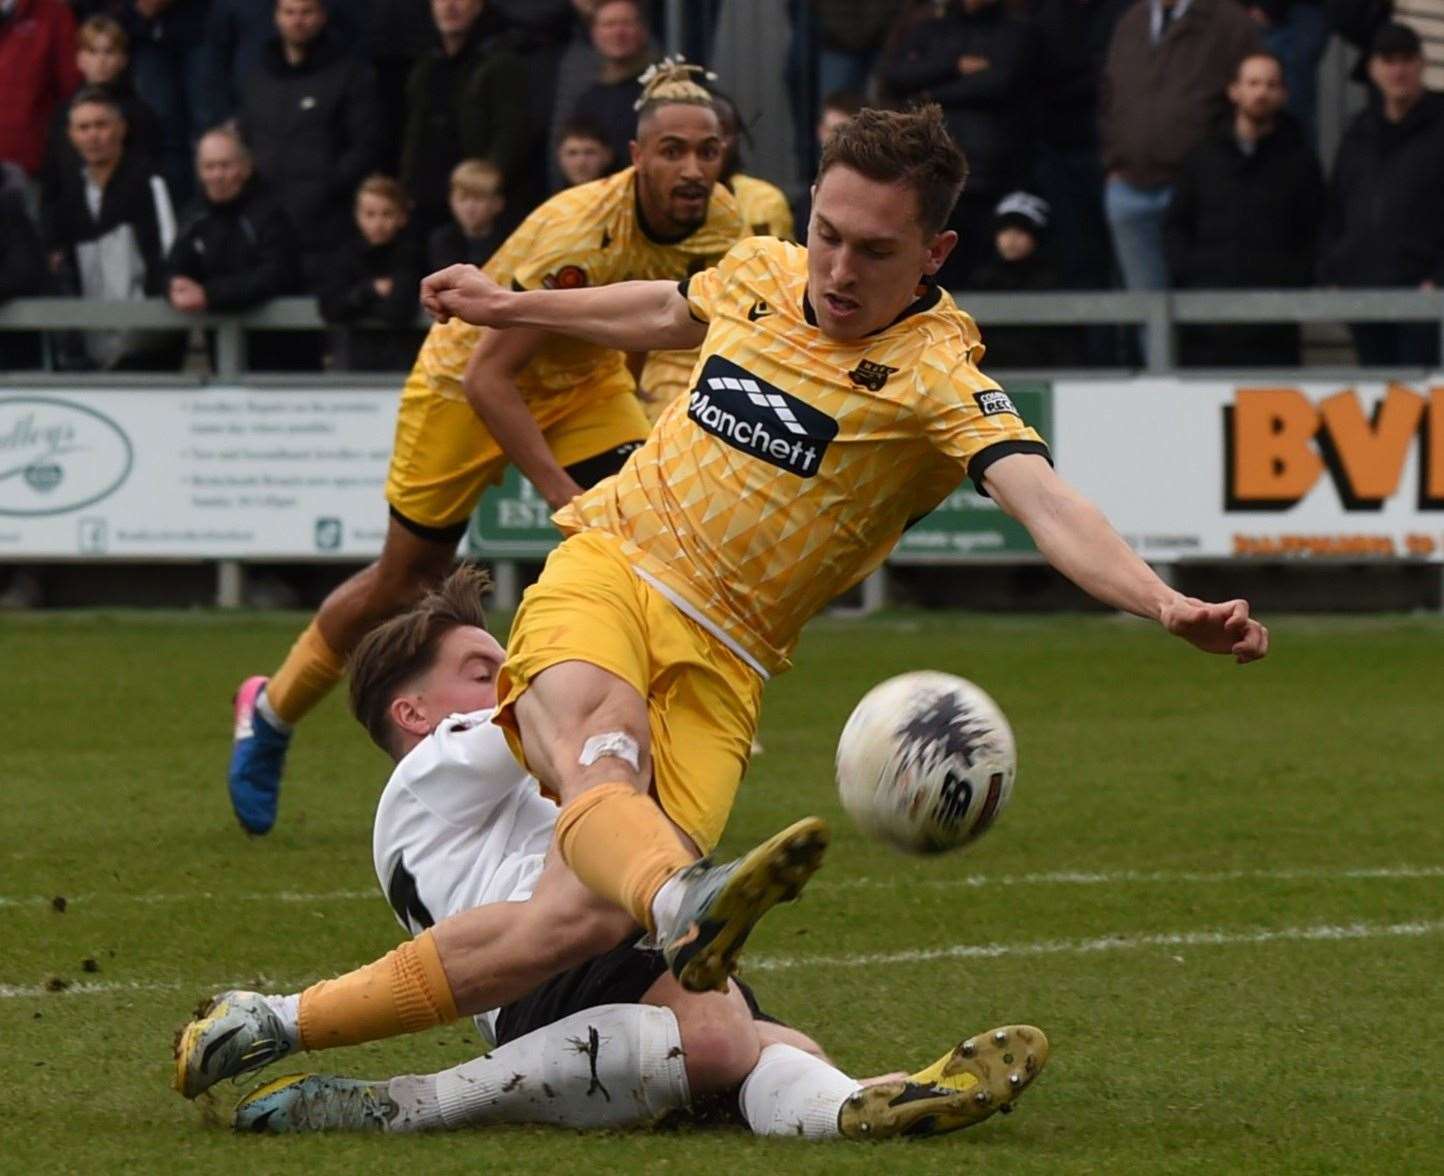 Dartford challenge Maidstone for the ball during last weekend’s 2-0 defeat at Princes Park. Picture: Steve Terrell